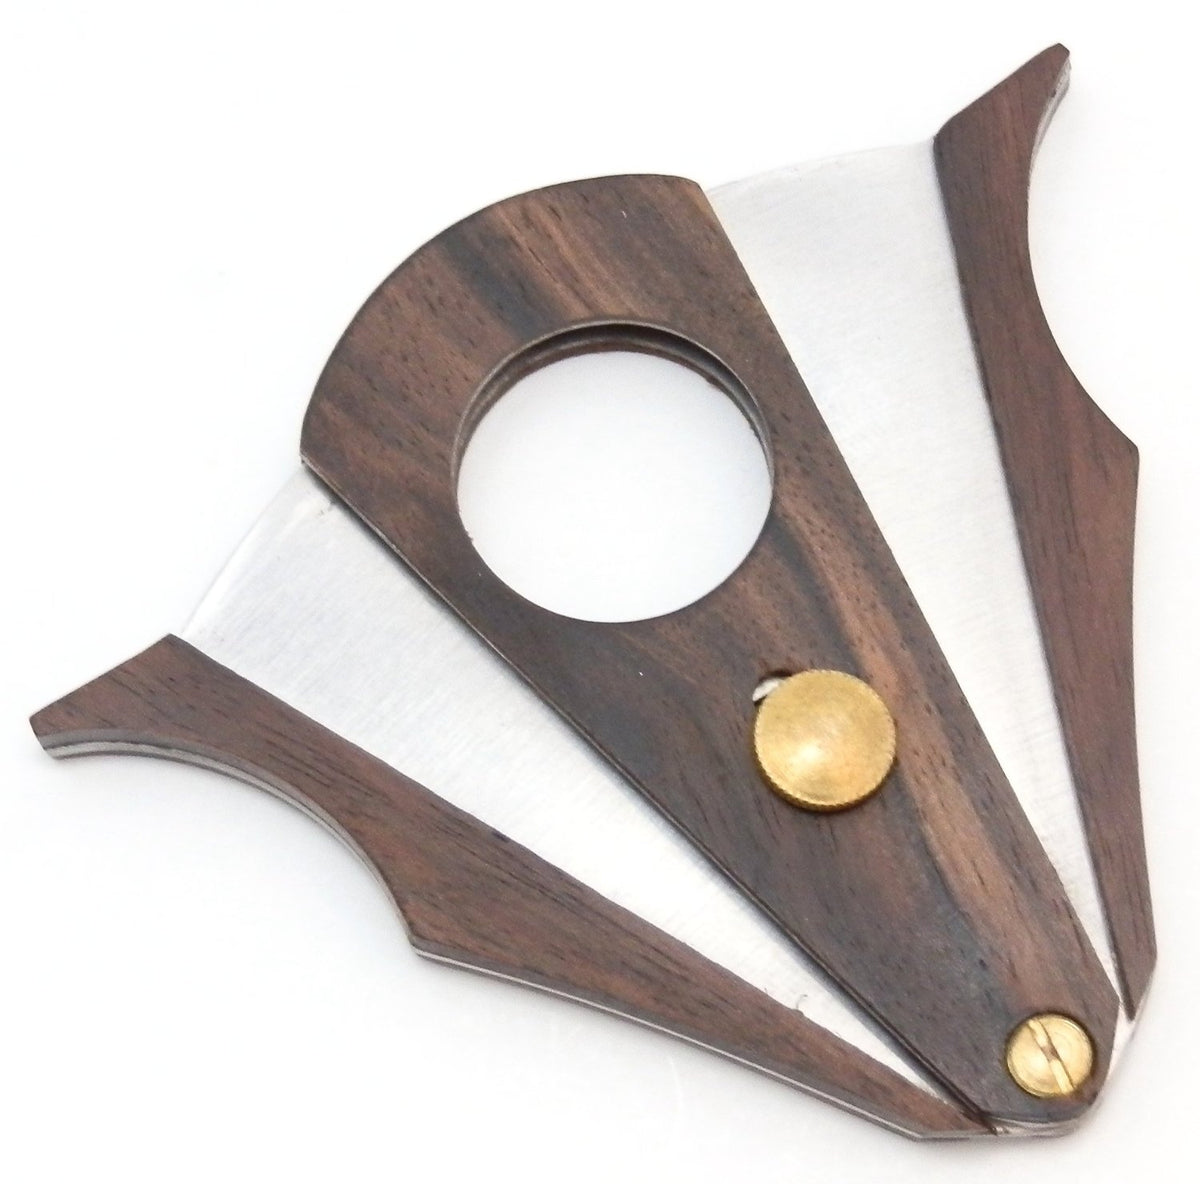 Cigar Cutter - Wood and Stainless Steel - Cut and Lock system